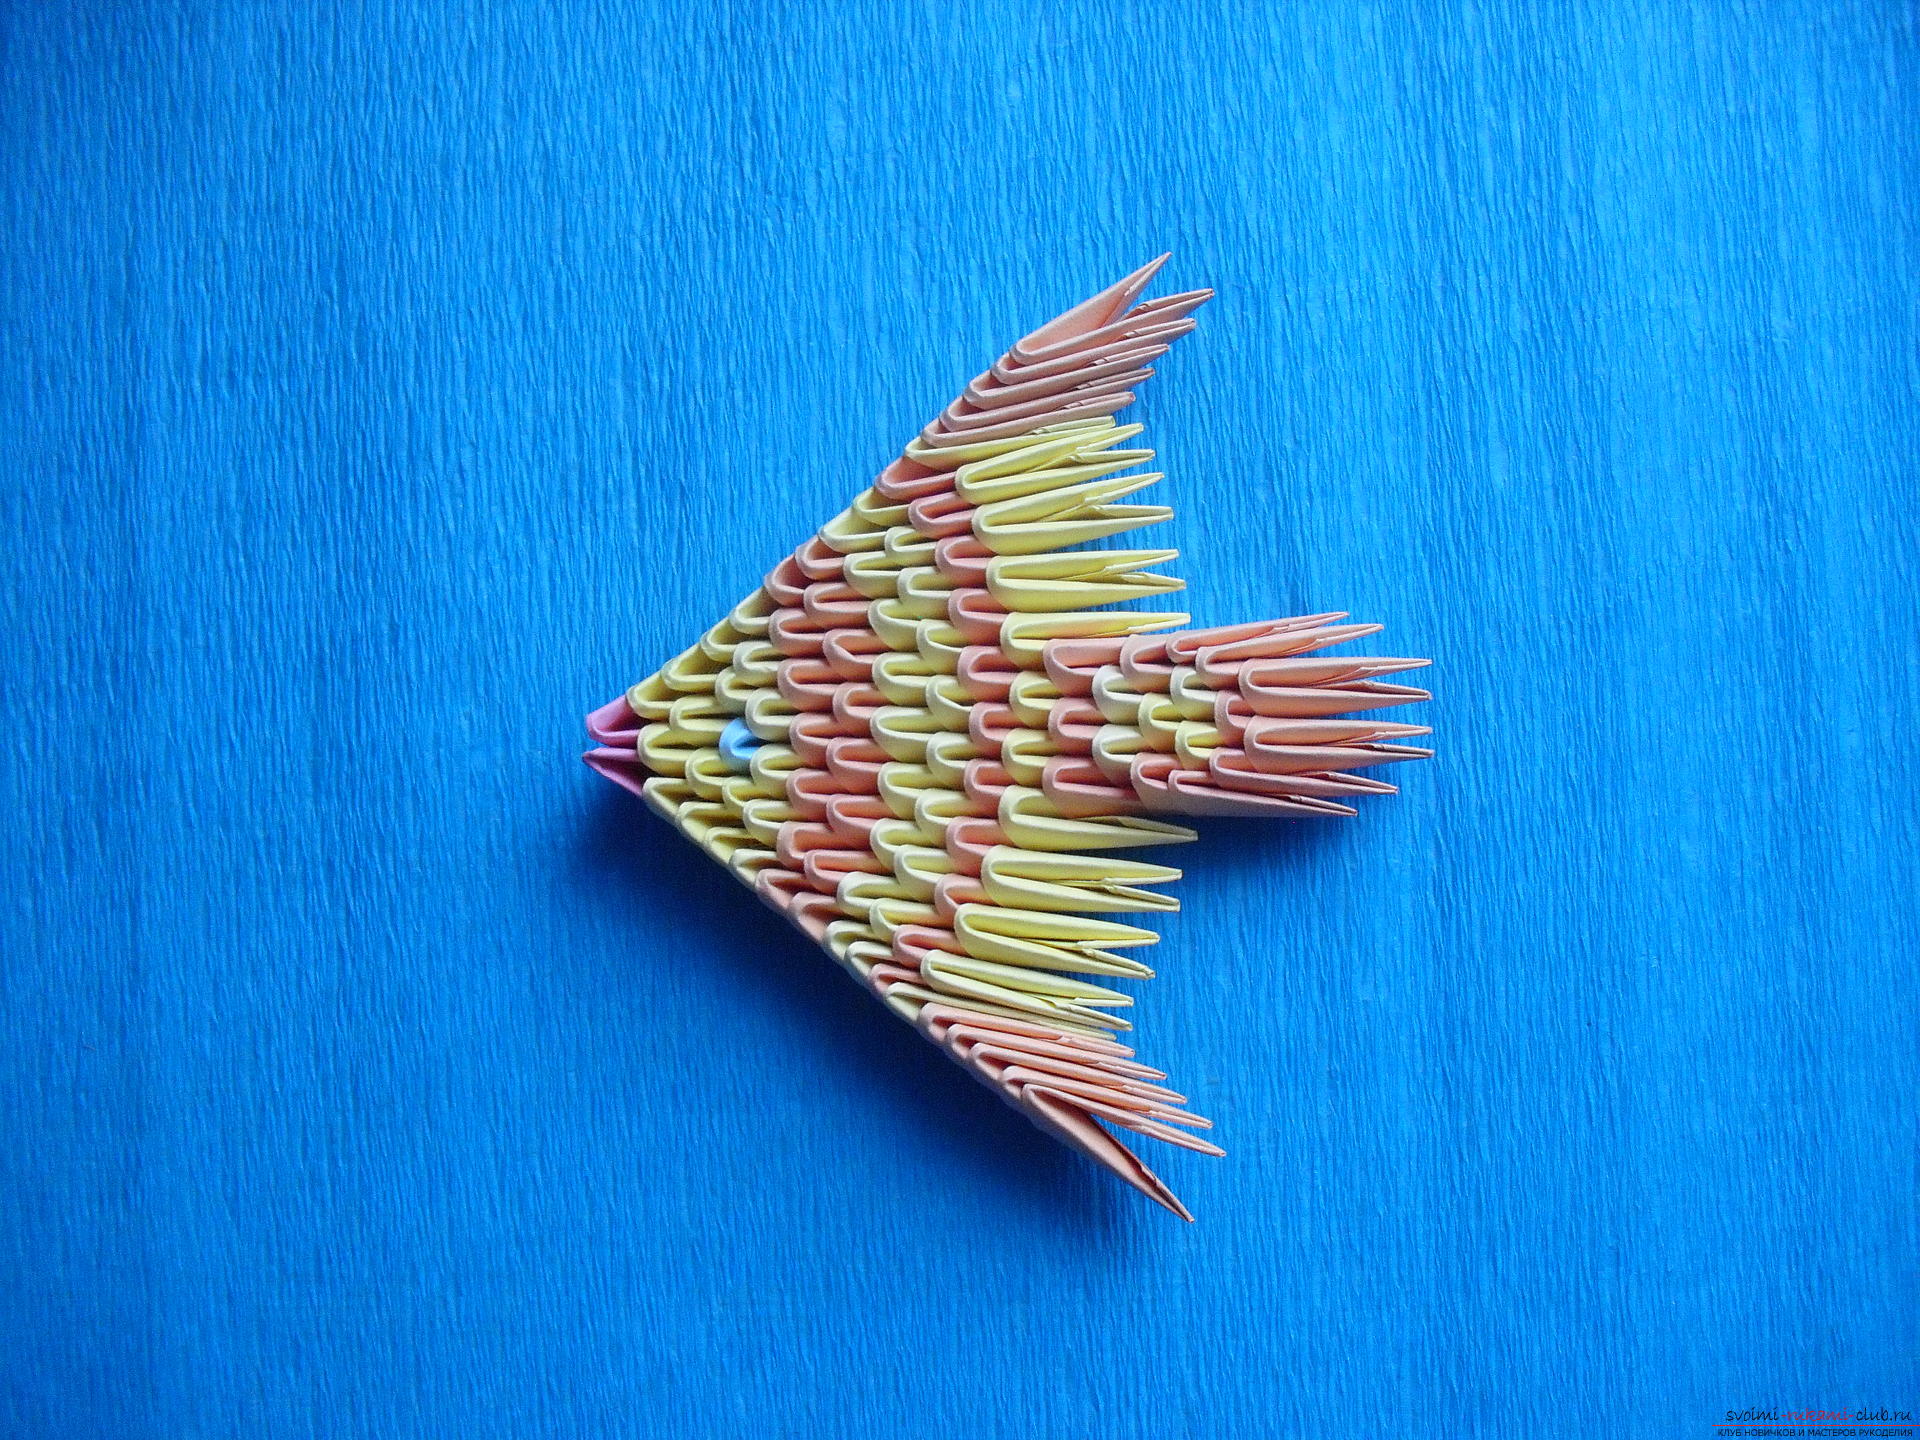 This master class will teach how to make a fish that fulfills desires in the technique of modular origami .. Photo # 1